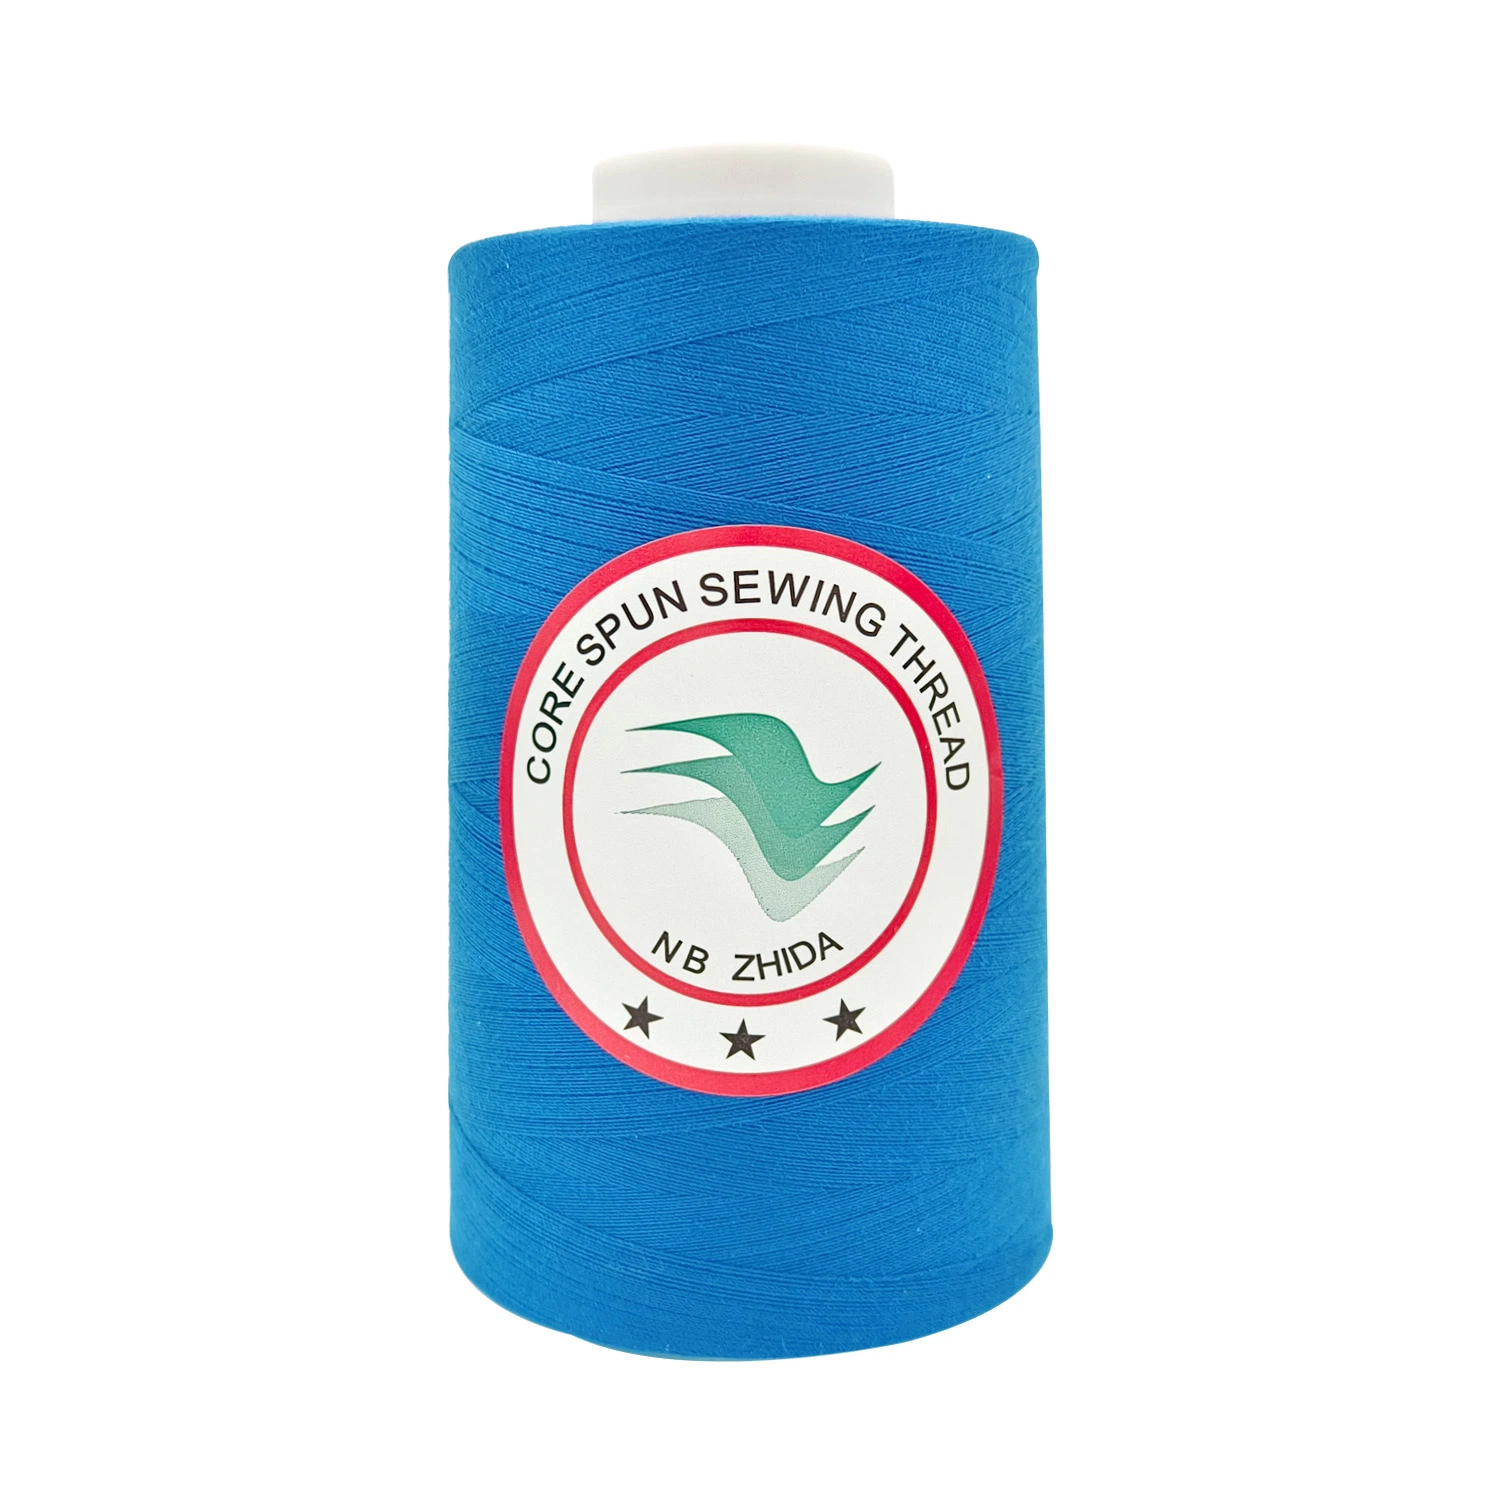 Factory Provide 100% Poly/Poly Core Sewing Thread 42s/2 5000m for Quality Clothes, Bags, Home Textiles